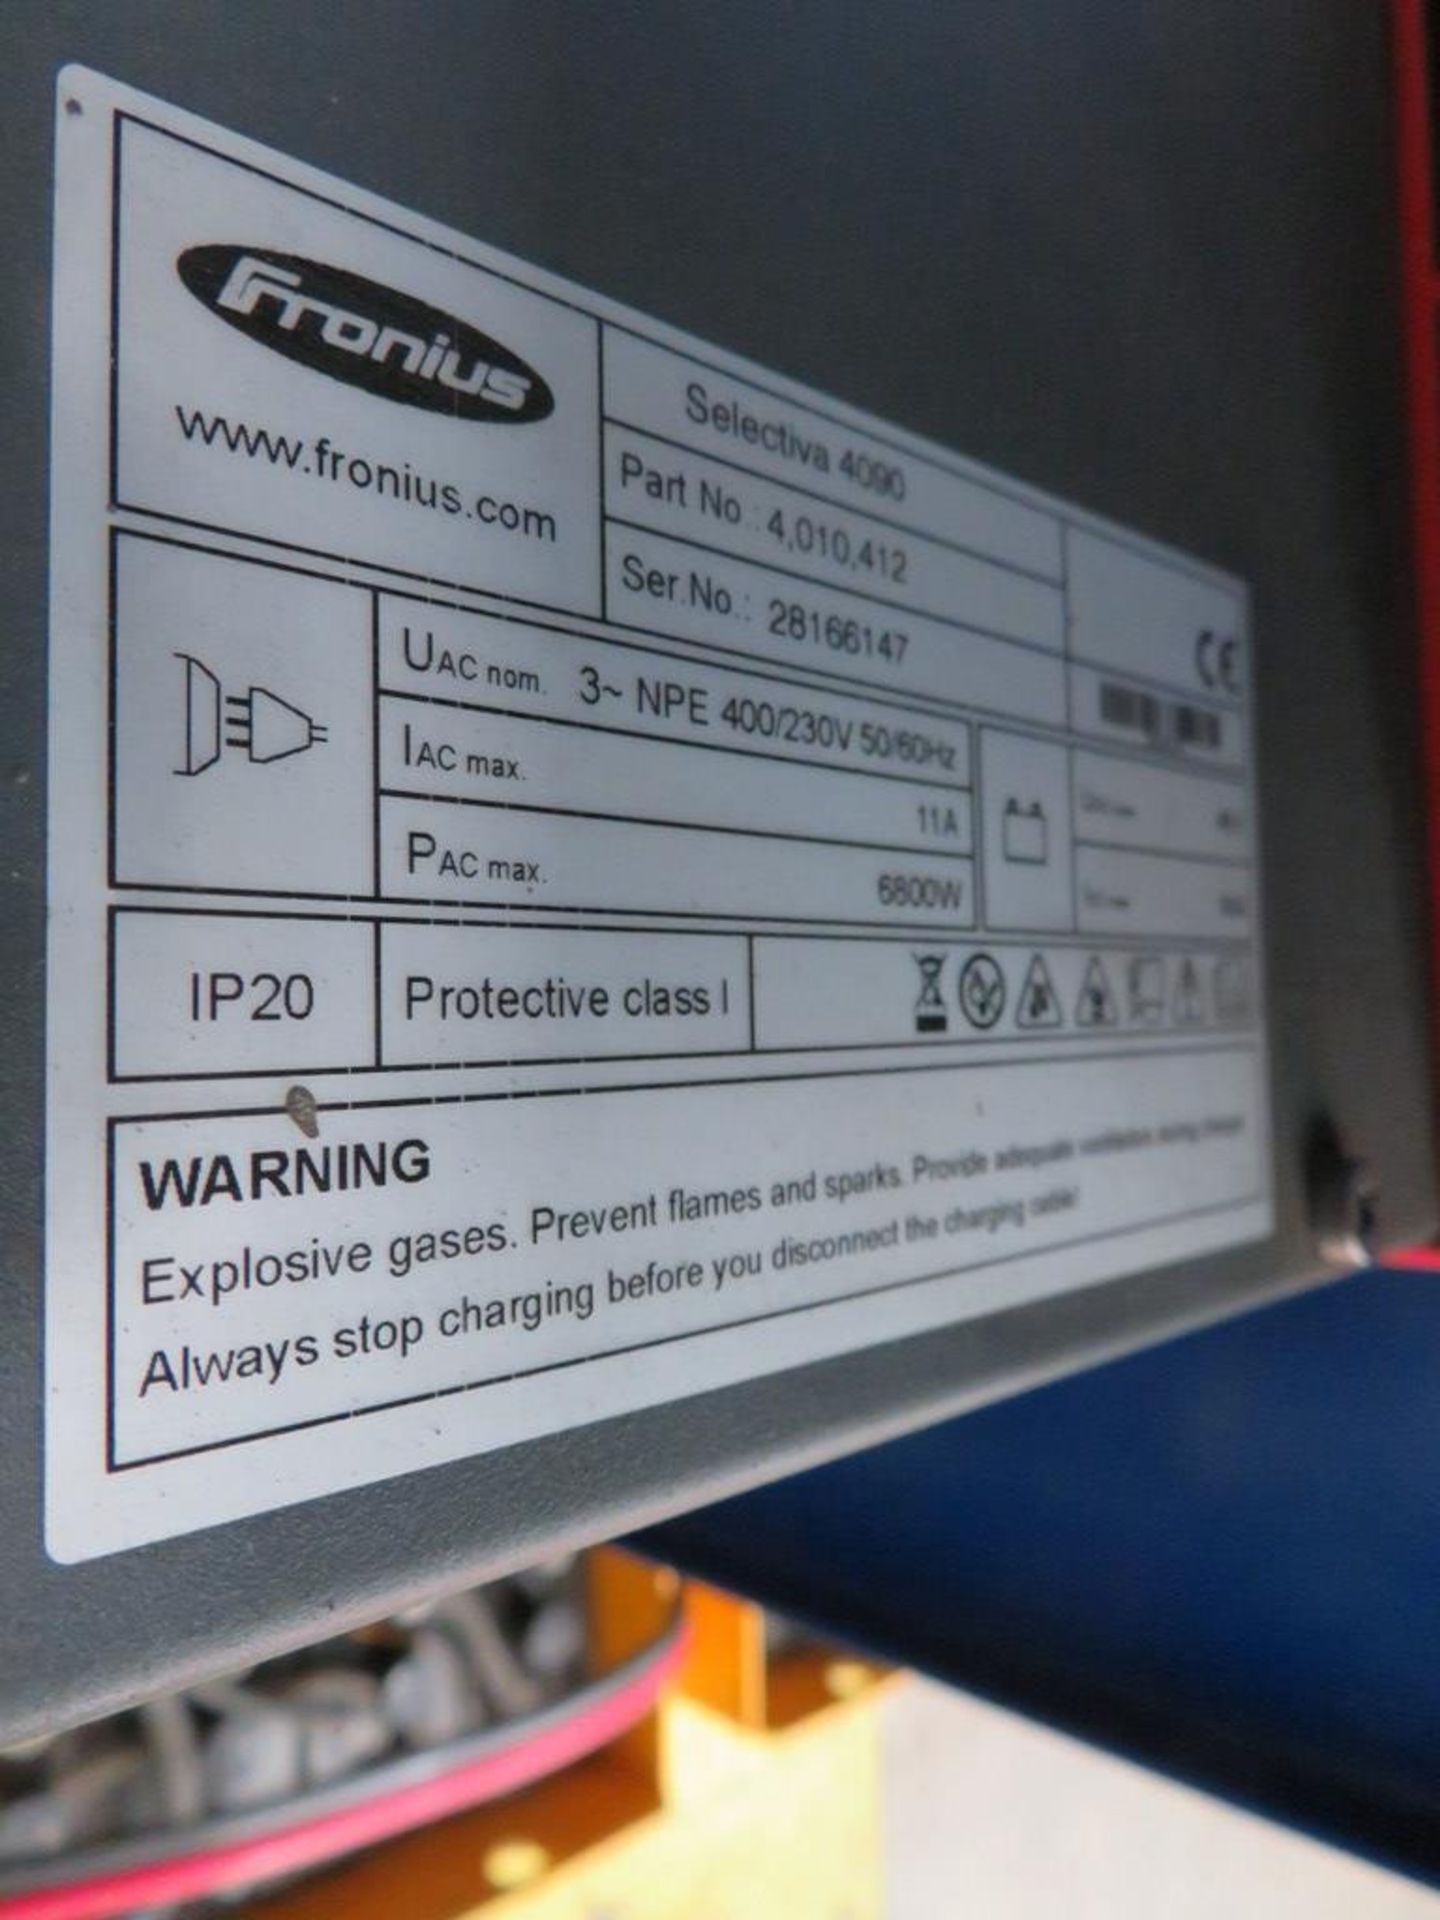 FRONIUS SELECTIVA 4090 8KW - 48V BATTERY CHARGER; SERIAL NO 28166147 - Image 2 of 2